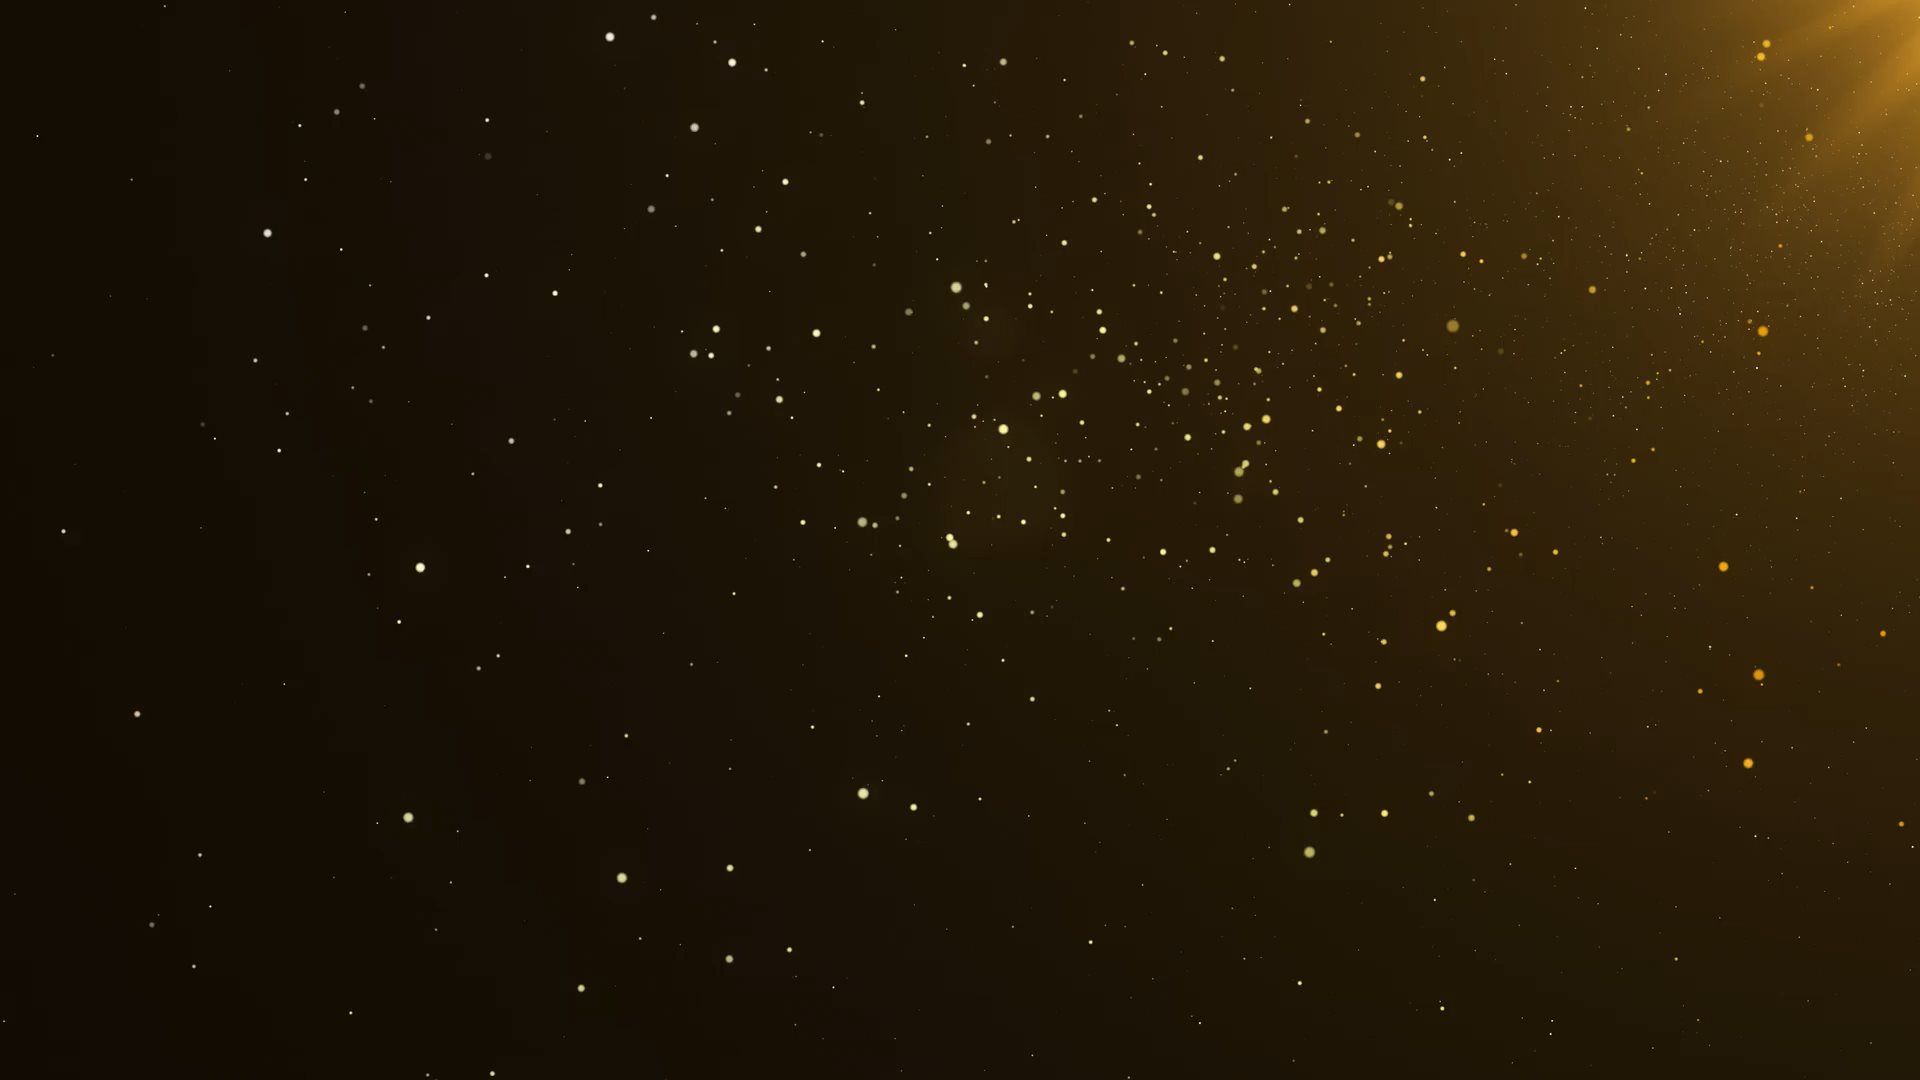 Video background with golden snow falling endlessly